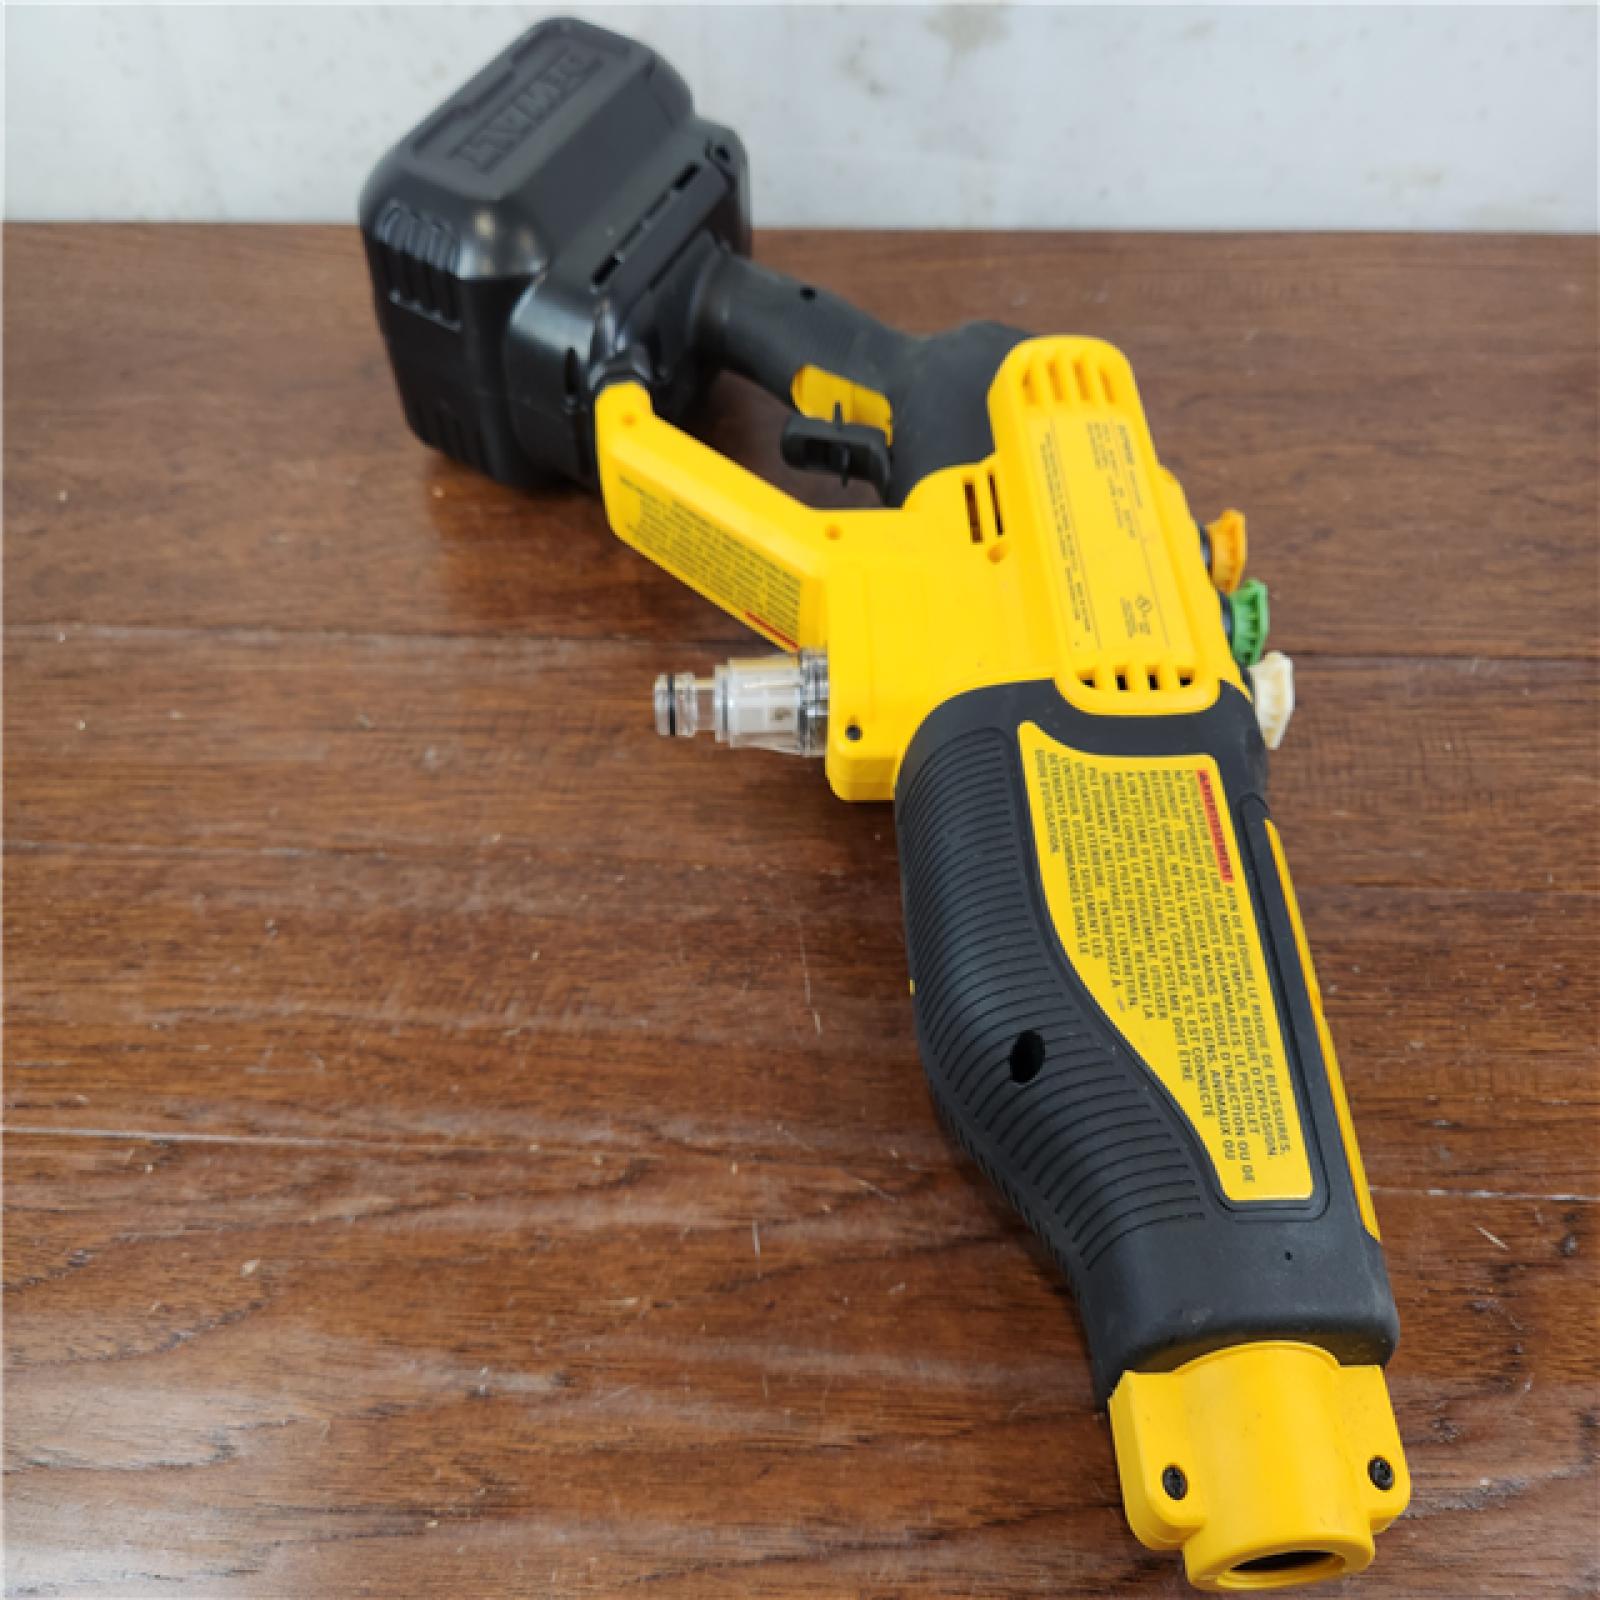 AS-IS DEWALT 20V MAX 550 PSI 1.0 GPM Cold Water Cordless Electric Power Cleaner (Tool Only)